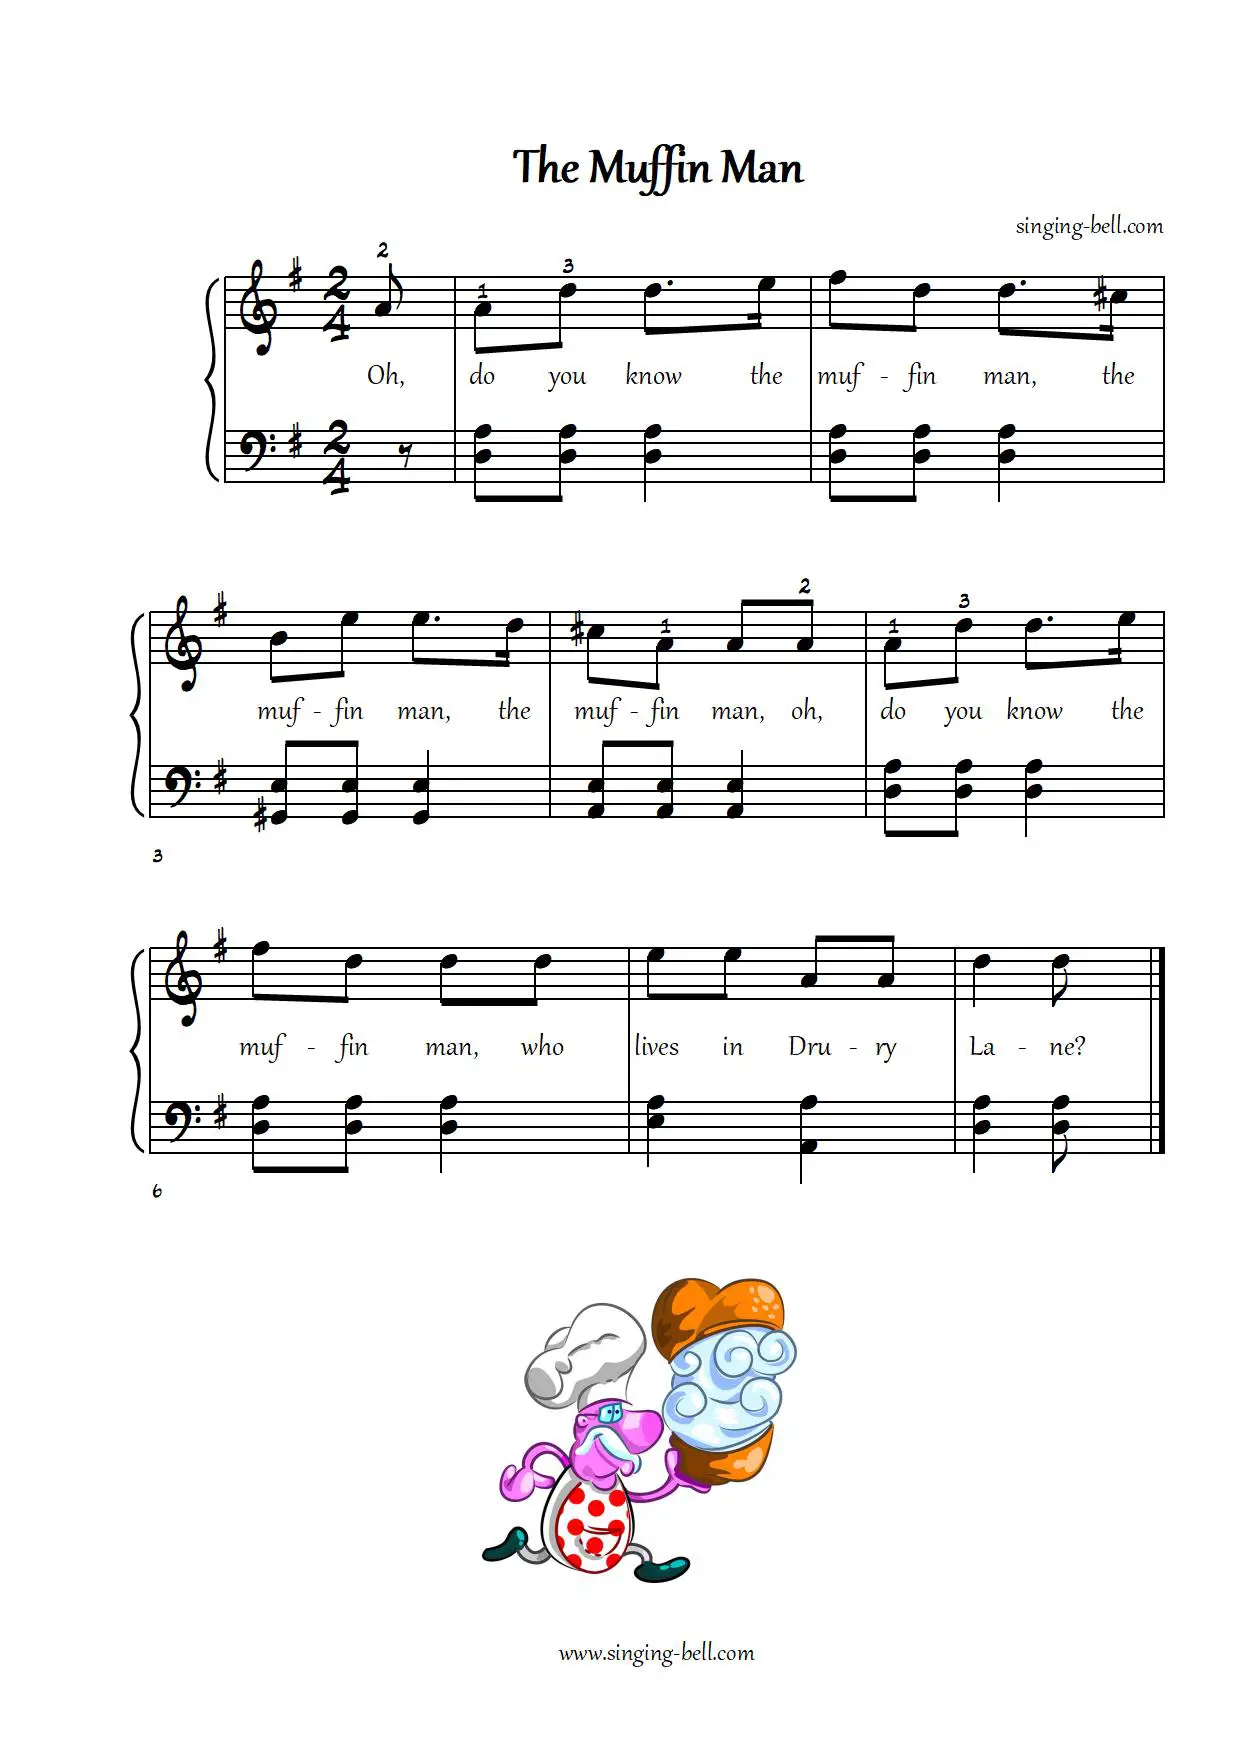 The Muffin Man easy piano sheet music notes chords beginners pdf